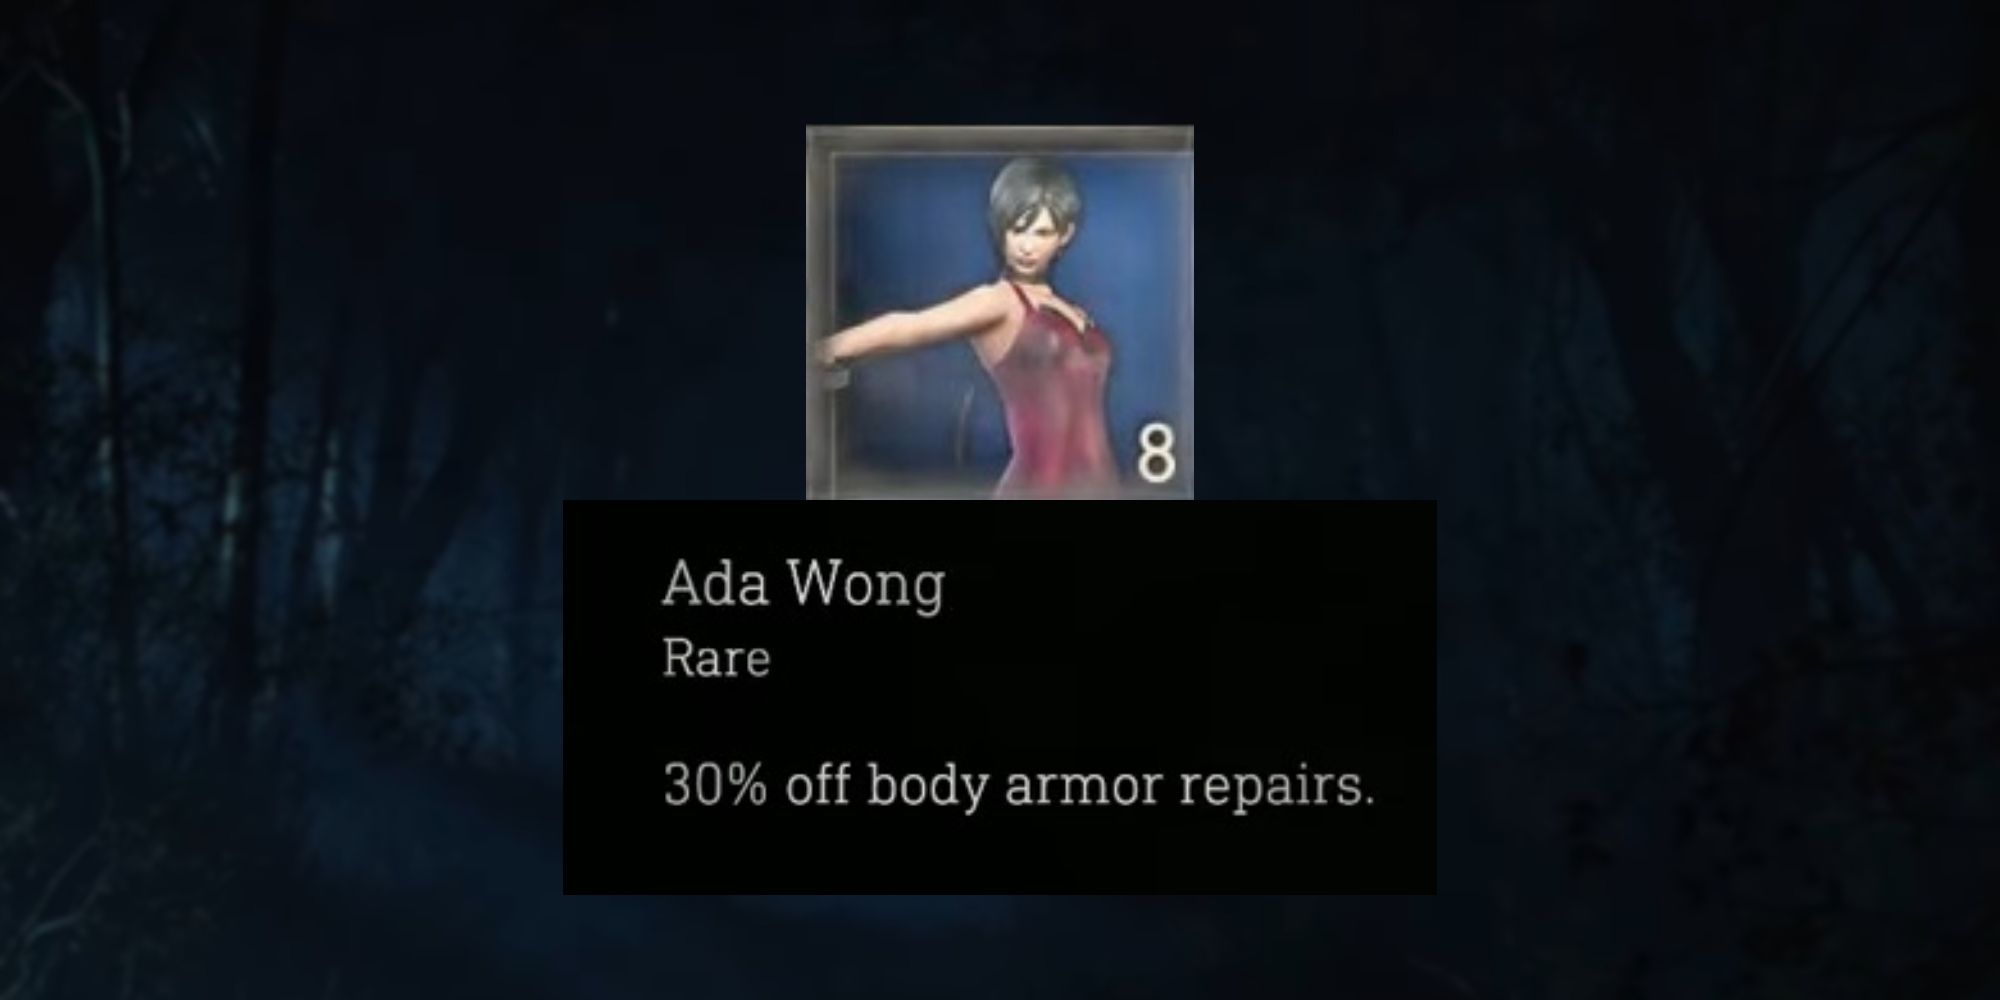 The Ada Wong charm from Resident Evil 4 Remake.